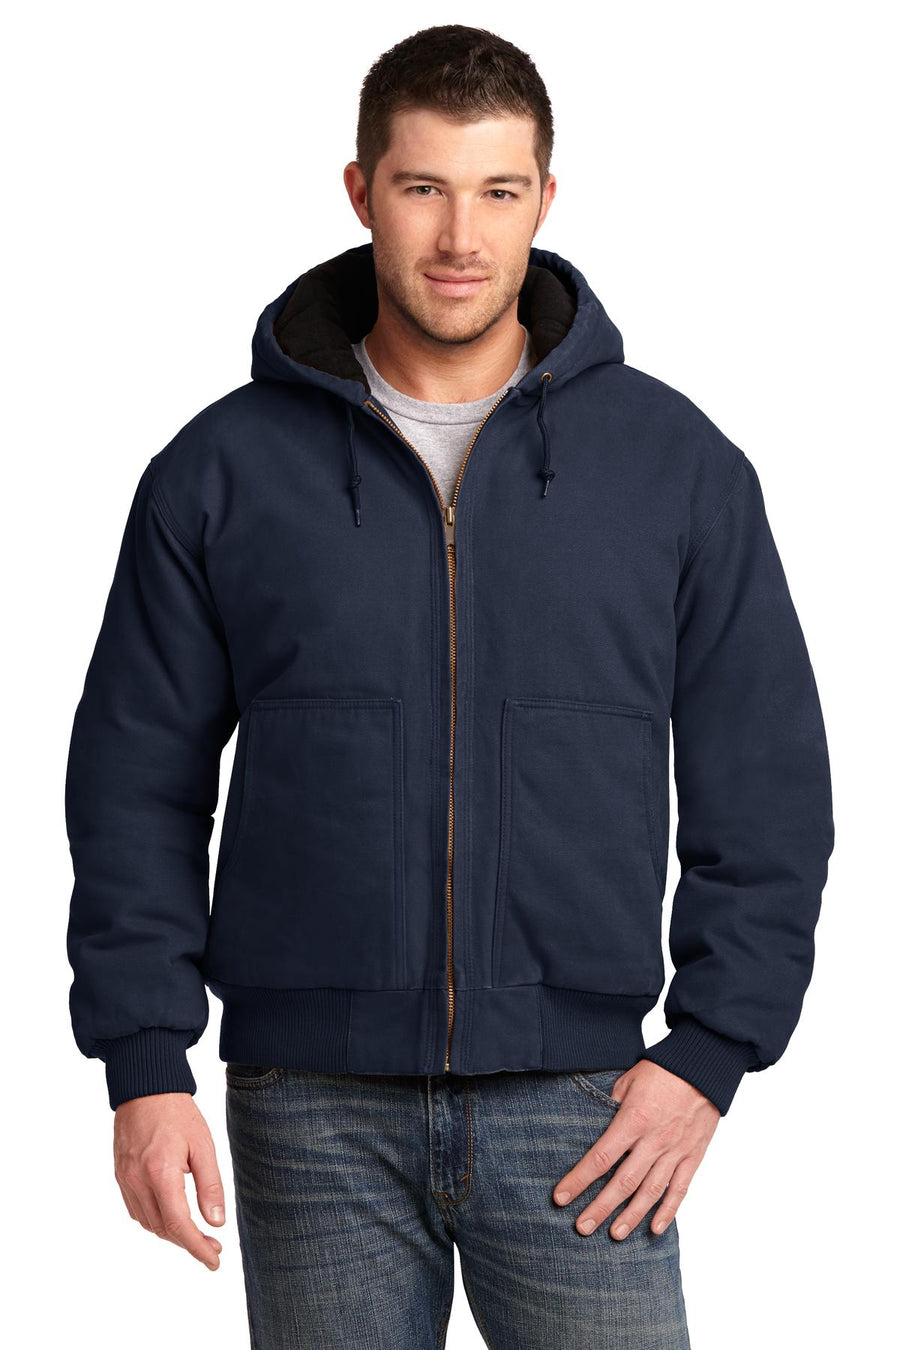 CornerStone Washed Duck Cloth Insulated Hooded Work Jacket.